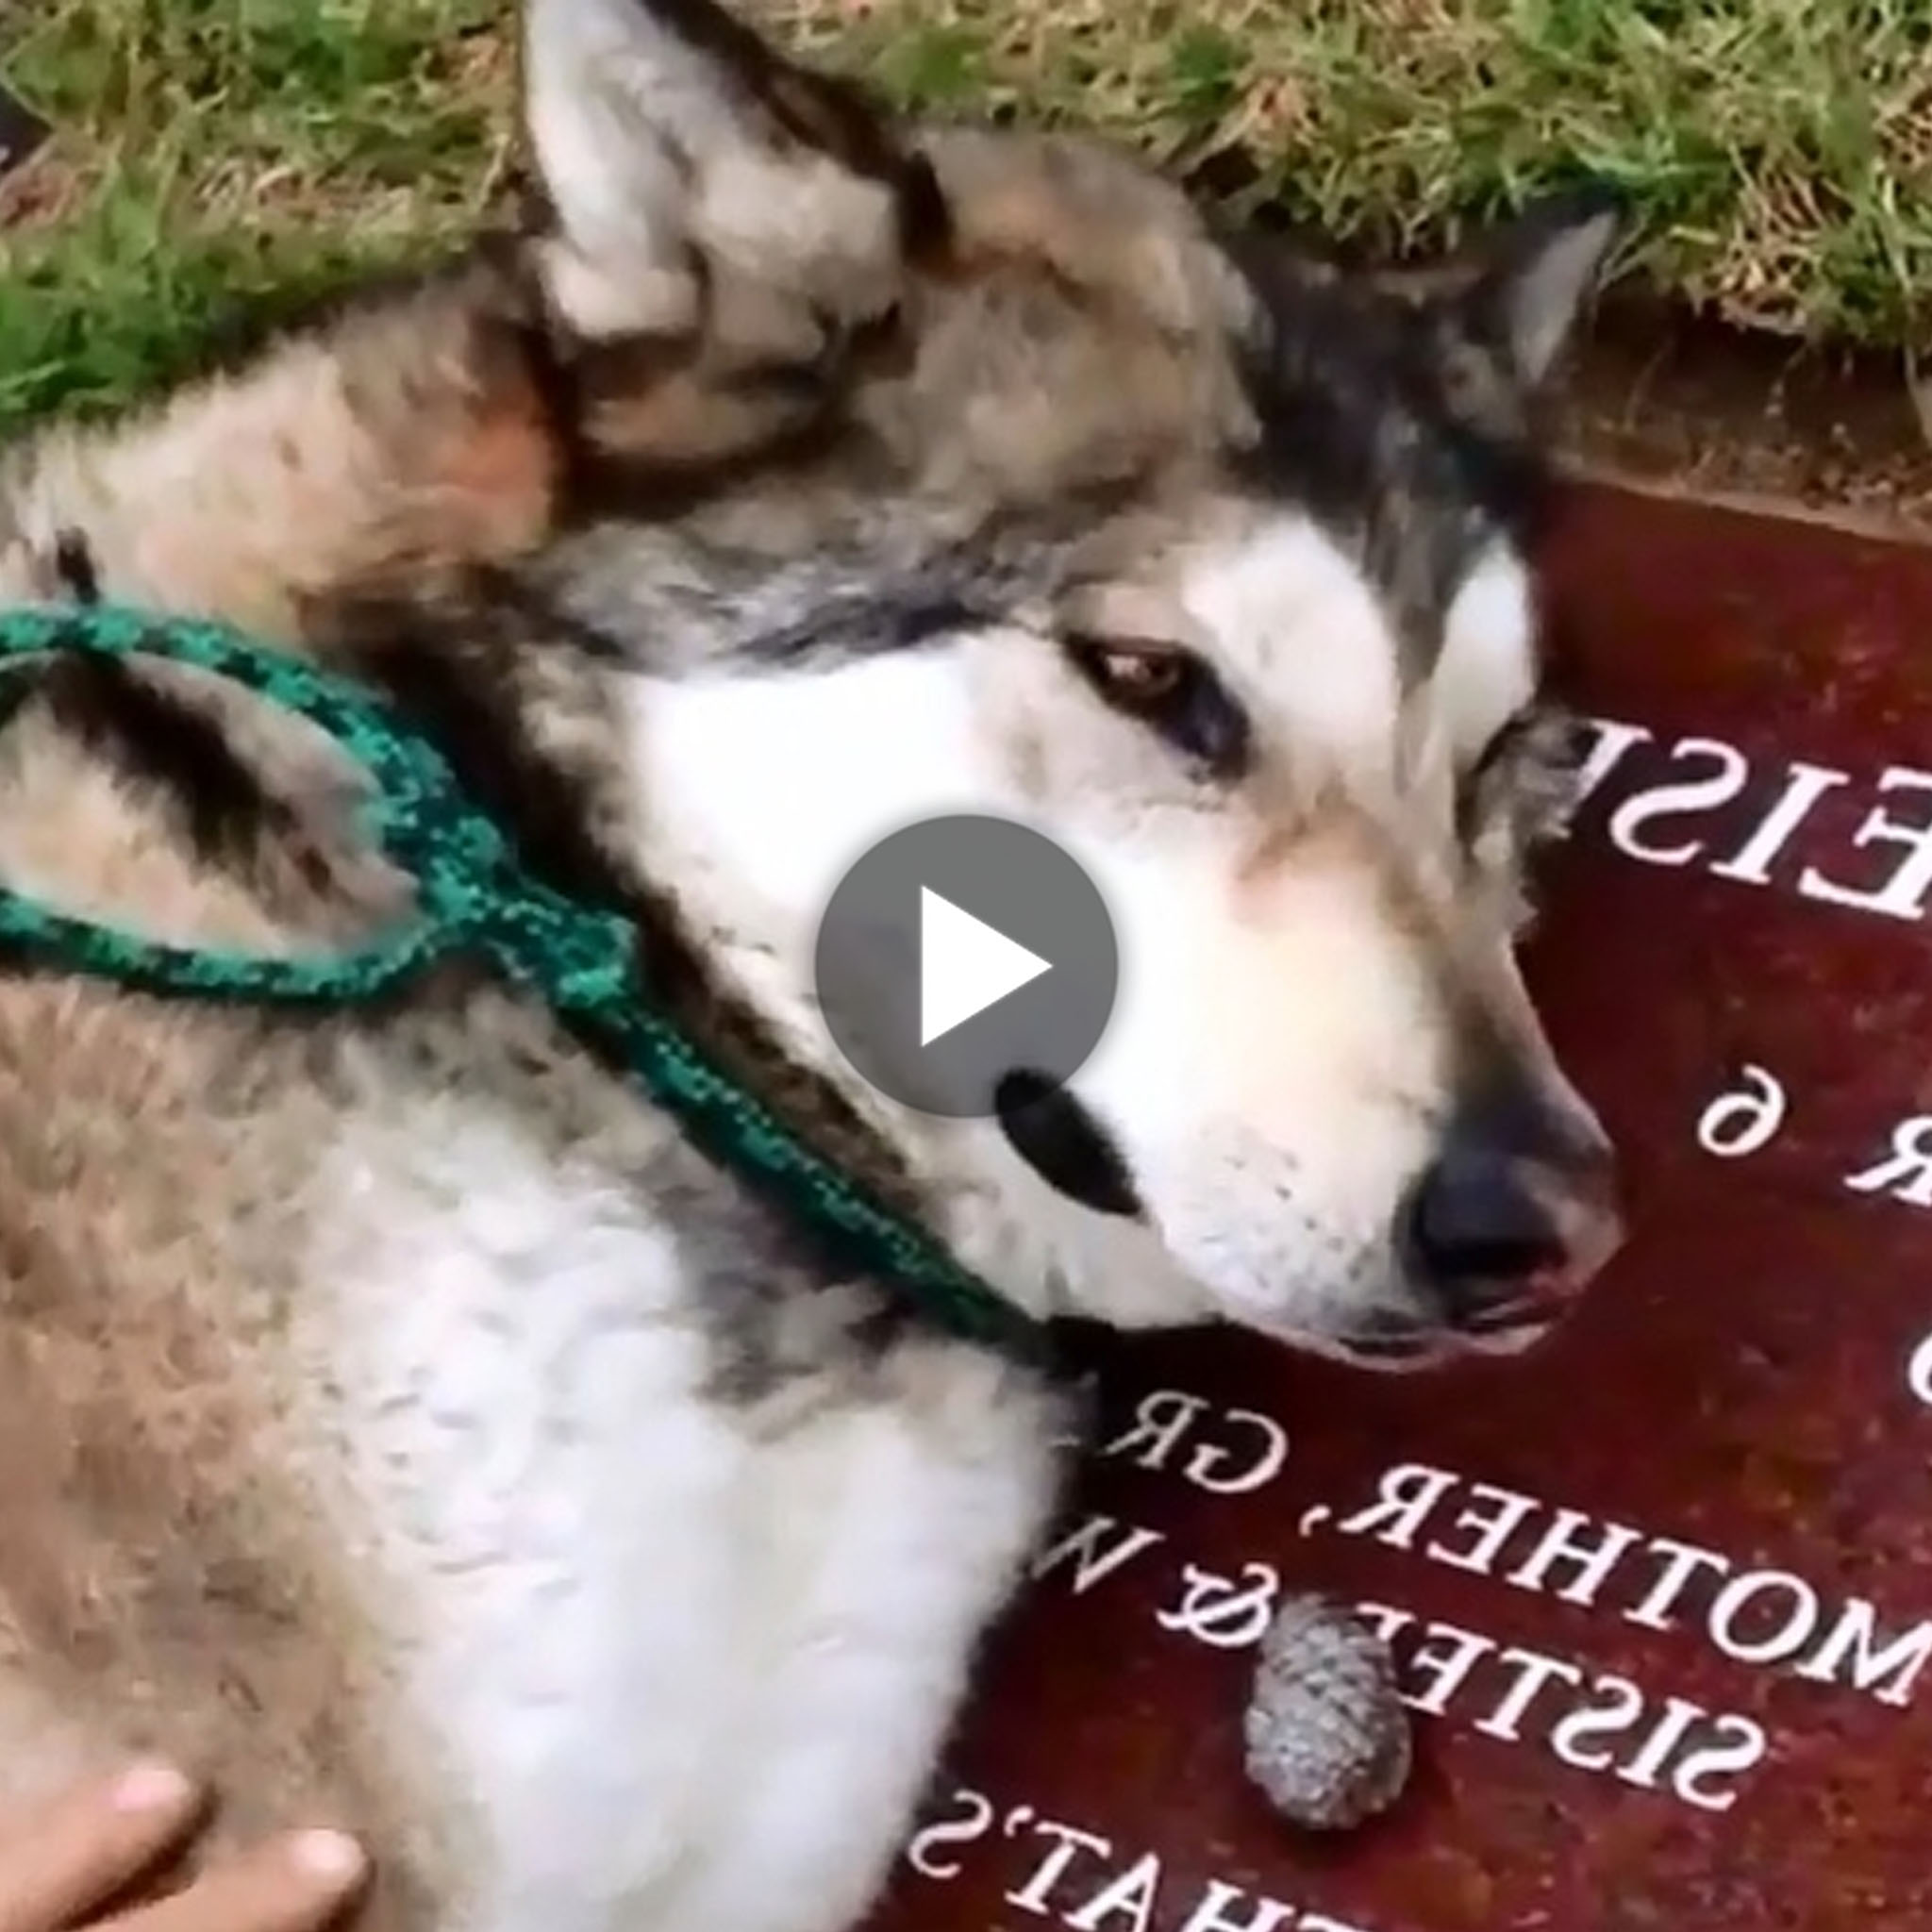 tho “Touching scene: Heartbroken Husky sheds tears in front of his owner’s gravestone moves netizens (Video)” tho